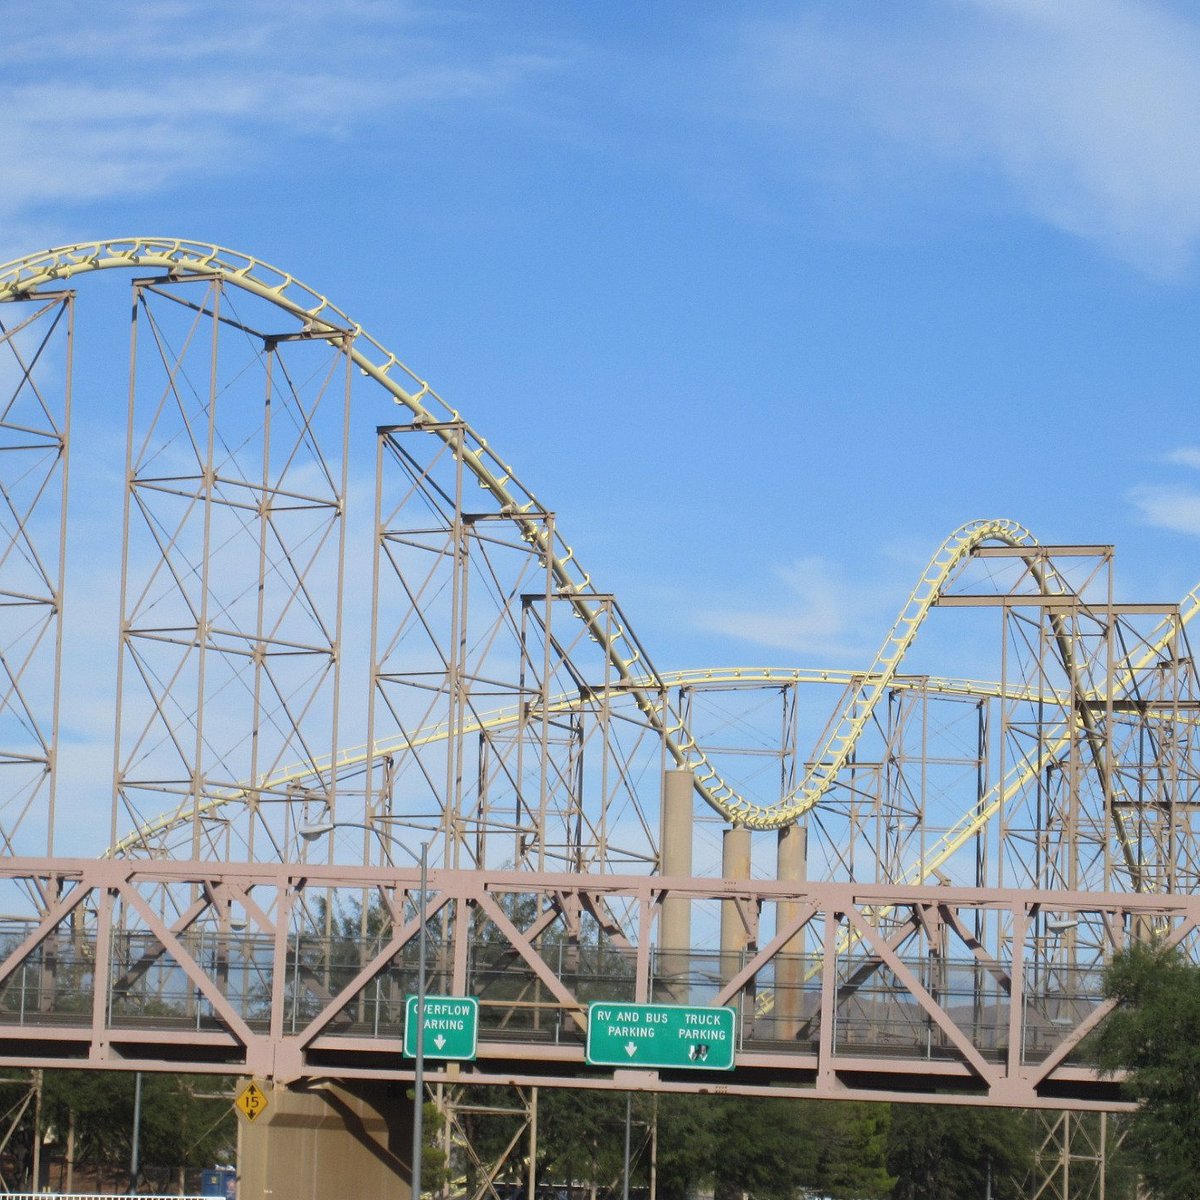 Seeking thrills and staying safe on roller coasters